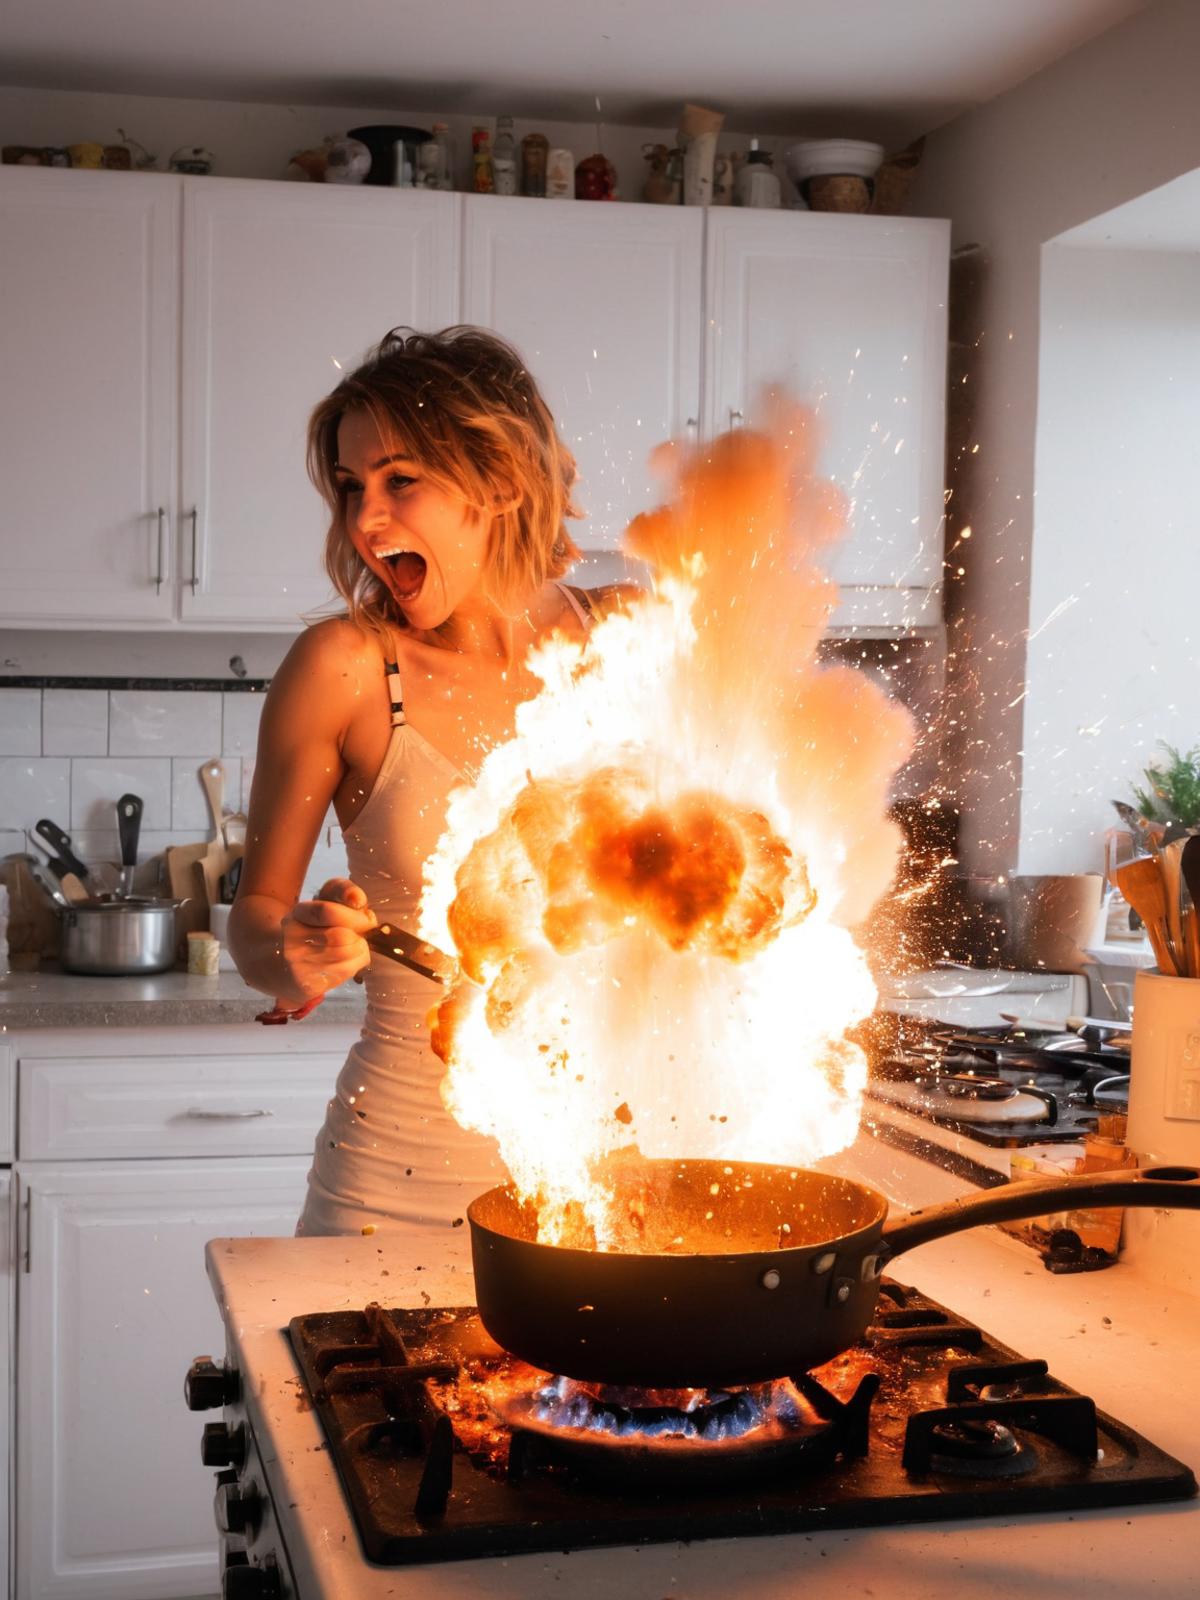 Woman Cooking in Kitchen with Flames and Smoke from Fire
===================================================================